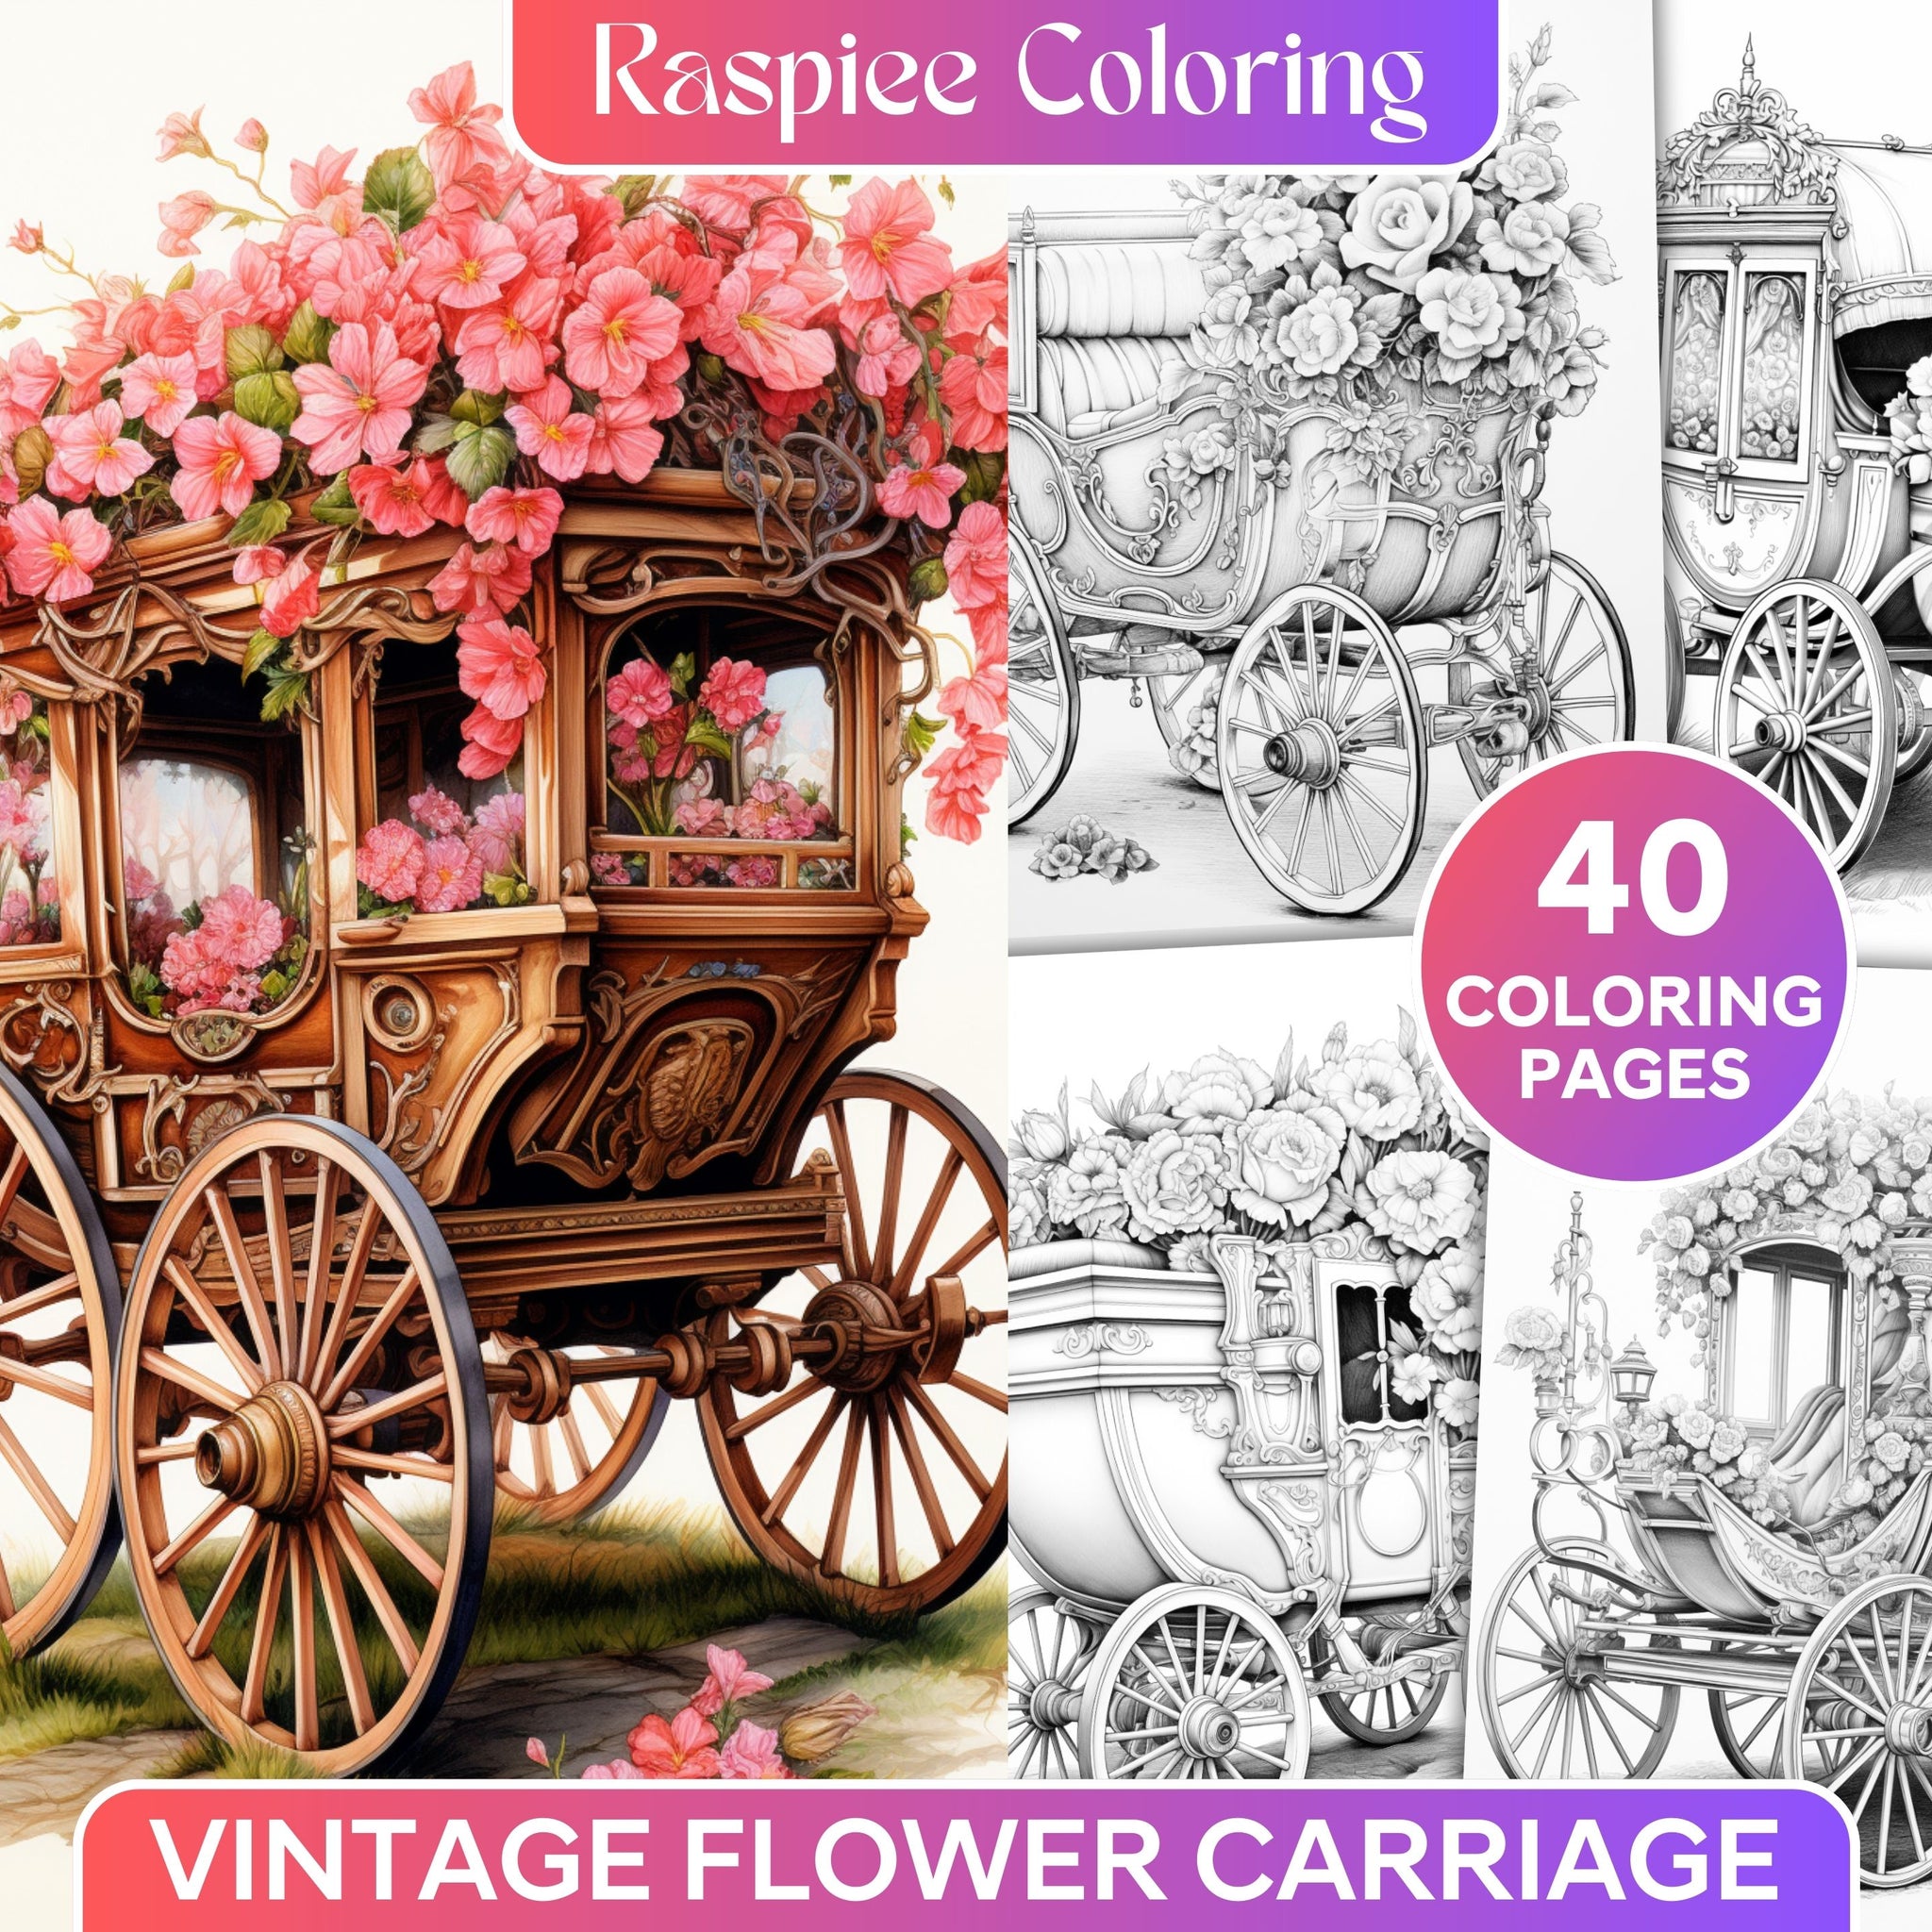 Vintage Flower Carriage Grayscale Coloring Pages Printable for Adults,